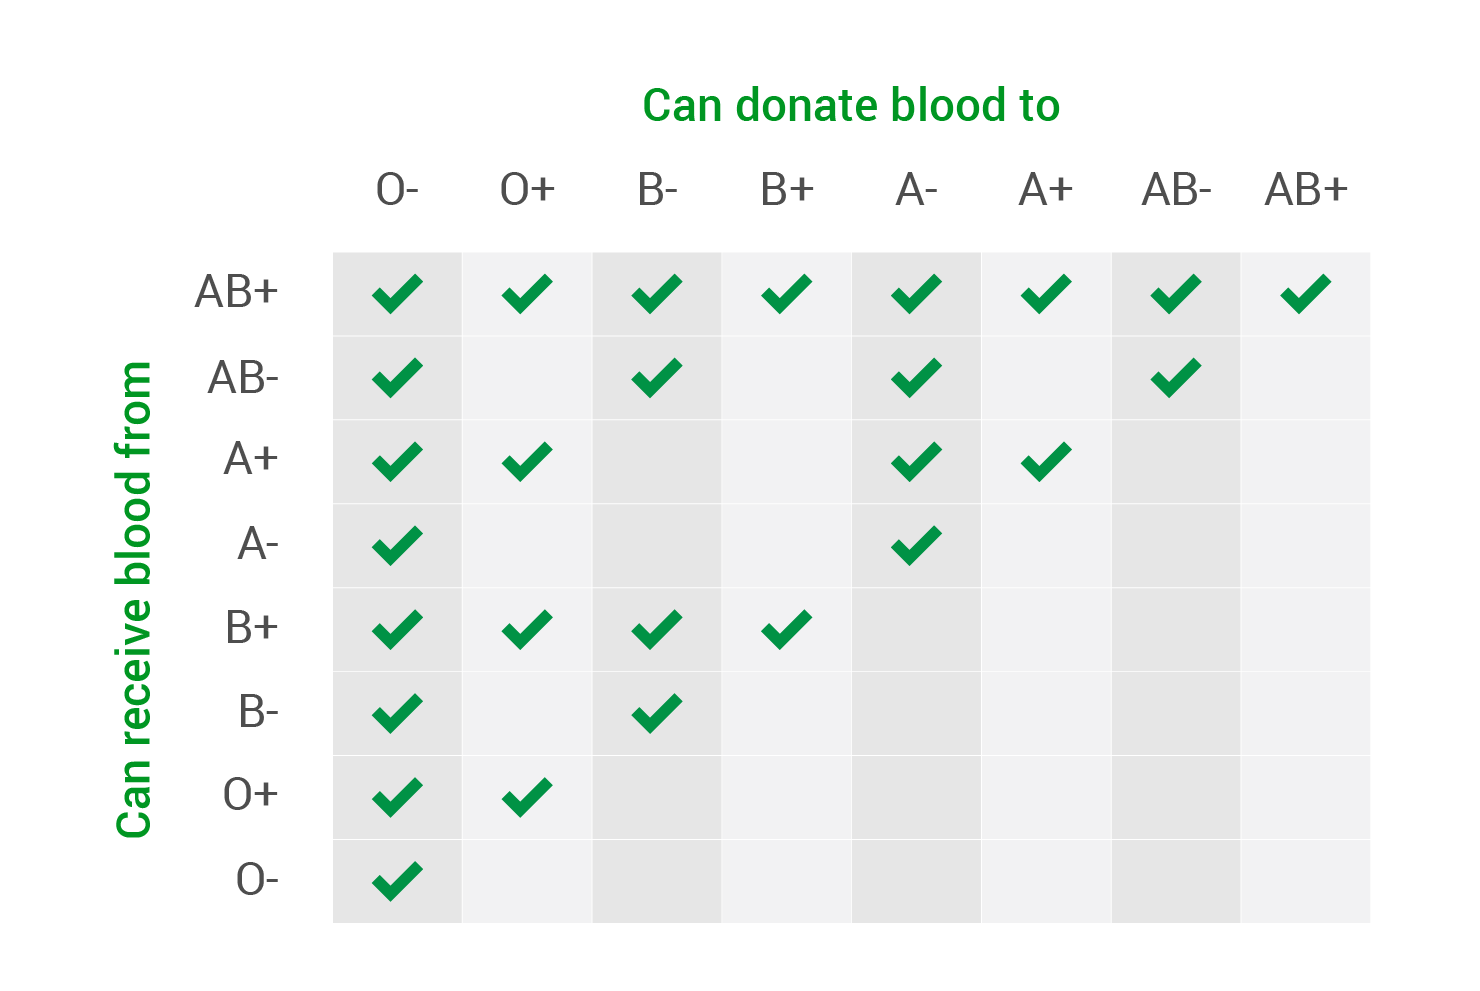 An infographic explaining who can receive and donate blood according to different blood types